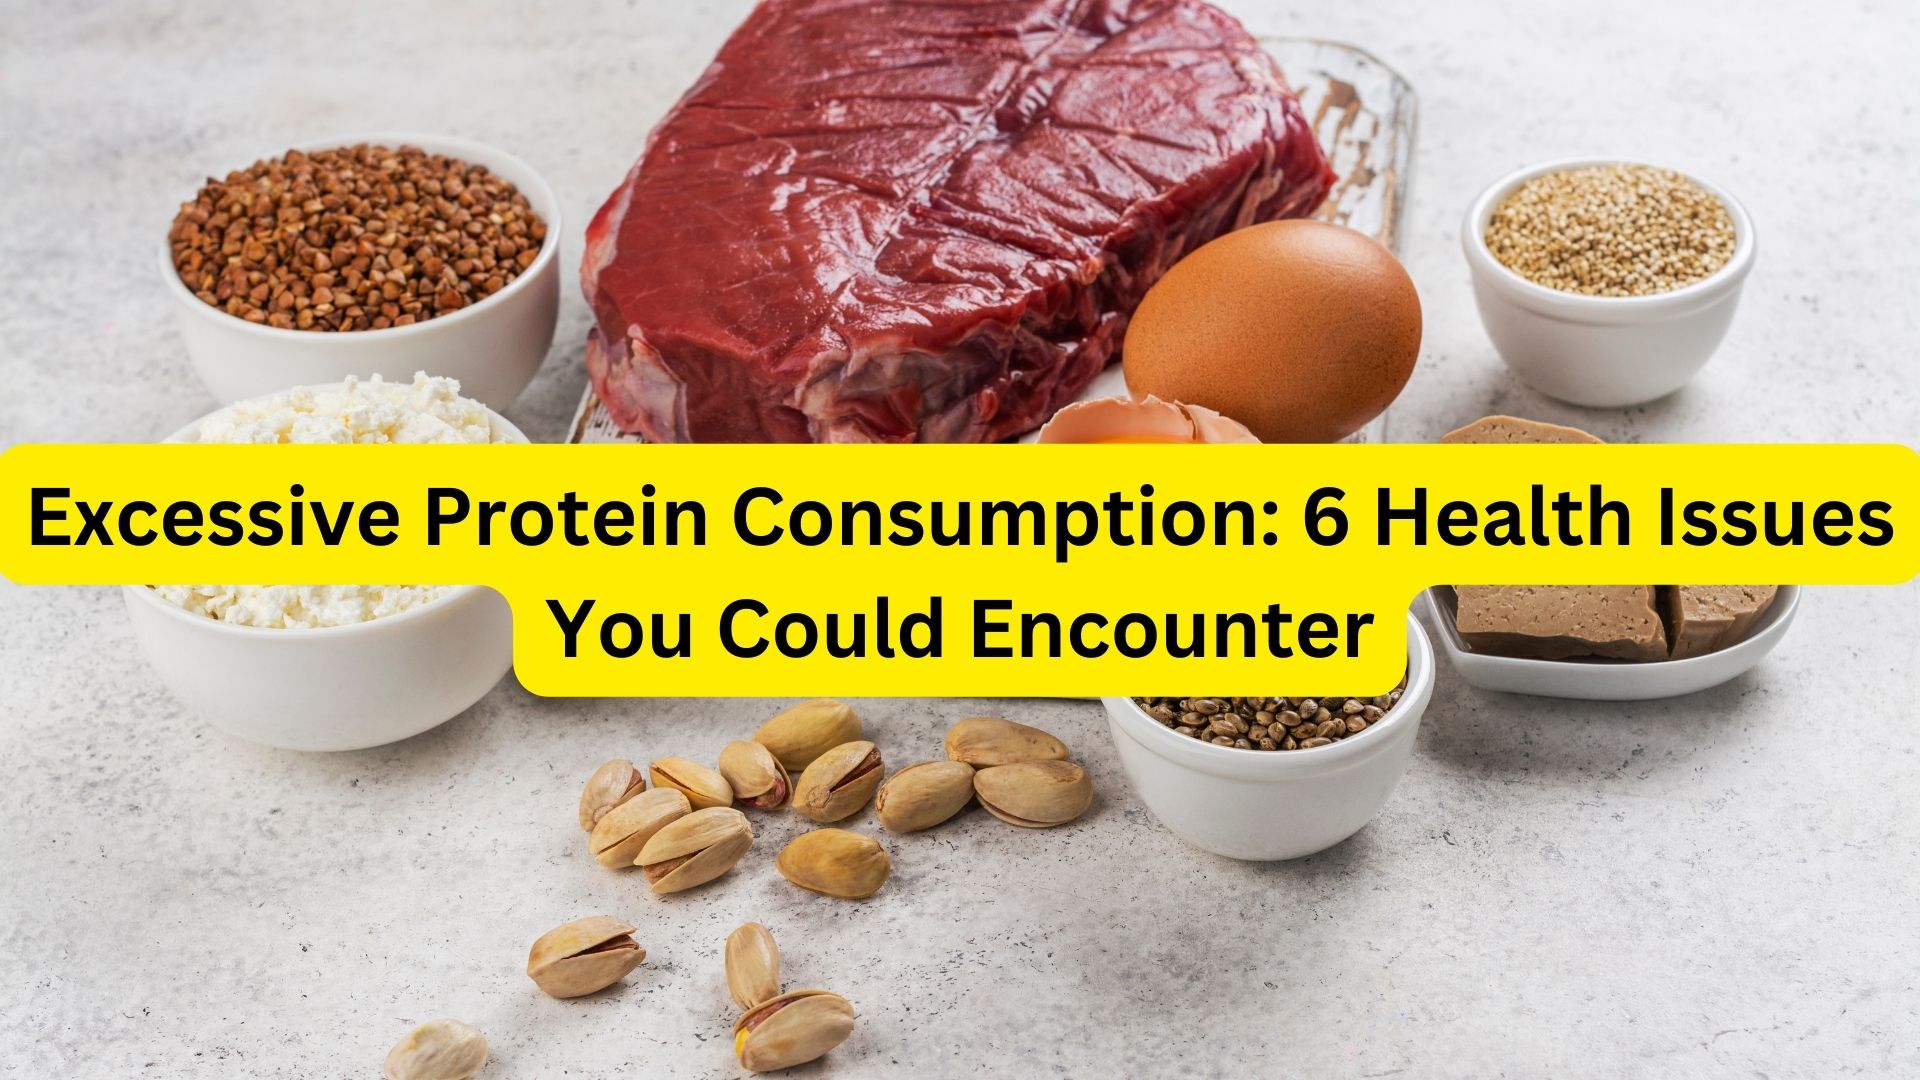 Excessive Protein Consumption: 6 Health Issues You Could Encounter